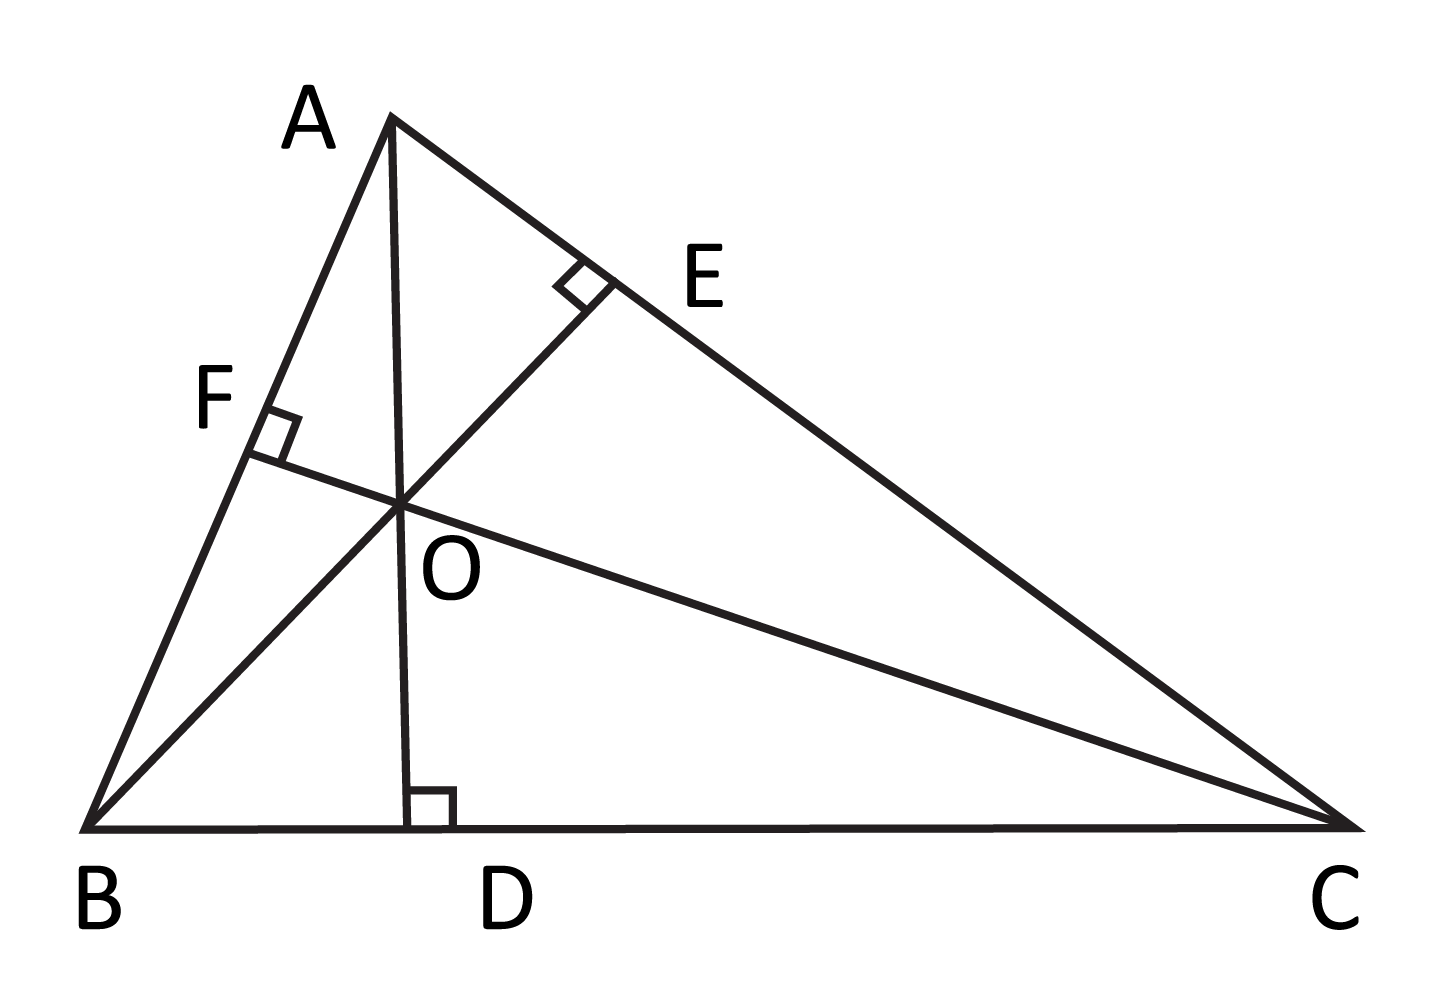 triangle, vertices A B and C, point E between points A and C, point F between points A and B, point D between points B and C, line segment connecting points B and E, line segment connecting points F and C, line segment connecting points A and D, square marking angle ADC, square marking angle AFC, square marking angle AEB, letter O marking where all three lines meet in the middle of the triangle